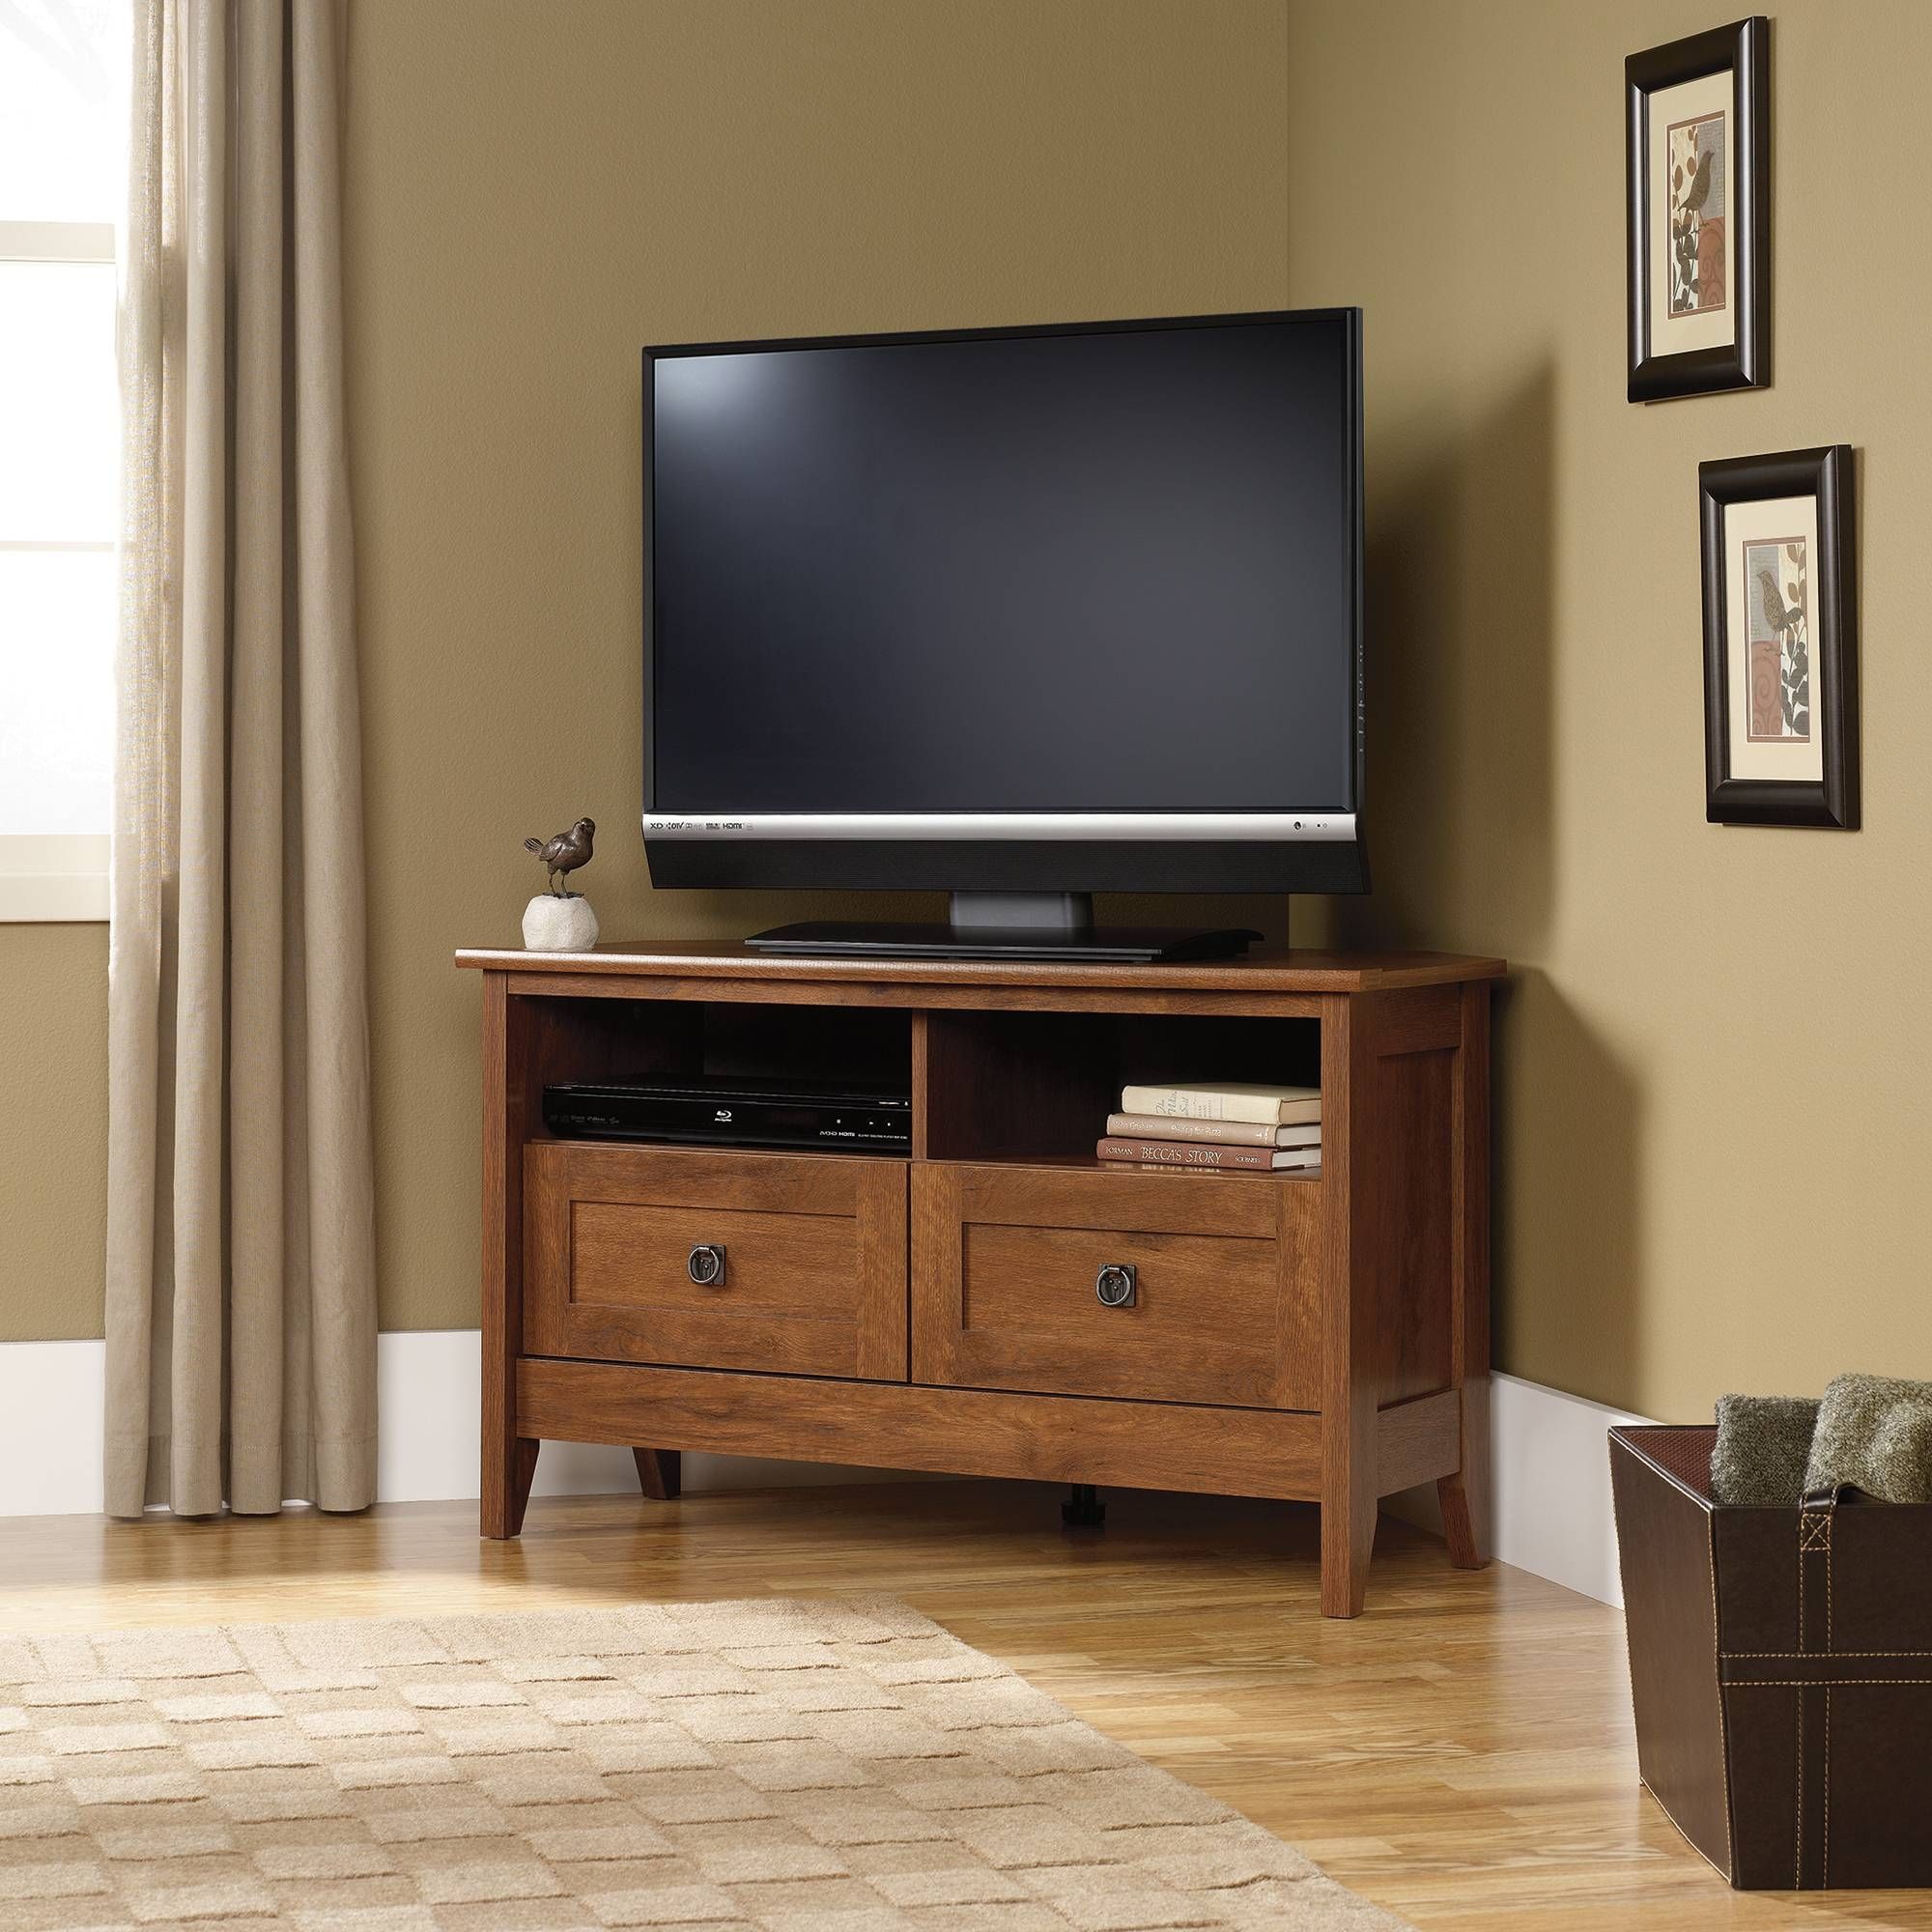 Sauder Select | Corner Tv Stand | 410627 | Sauder Throughout Tv Stands 40 Inches Wide (View 8 of 15)